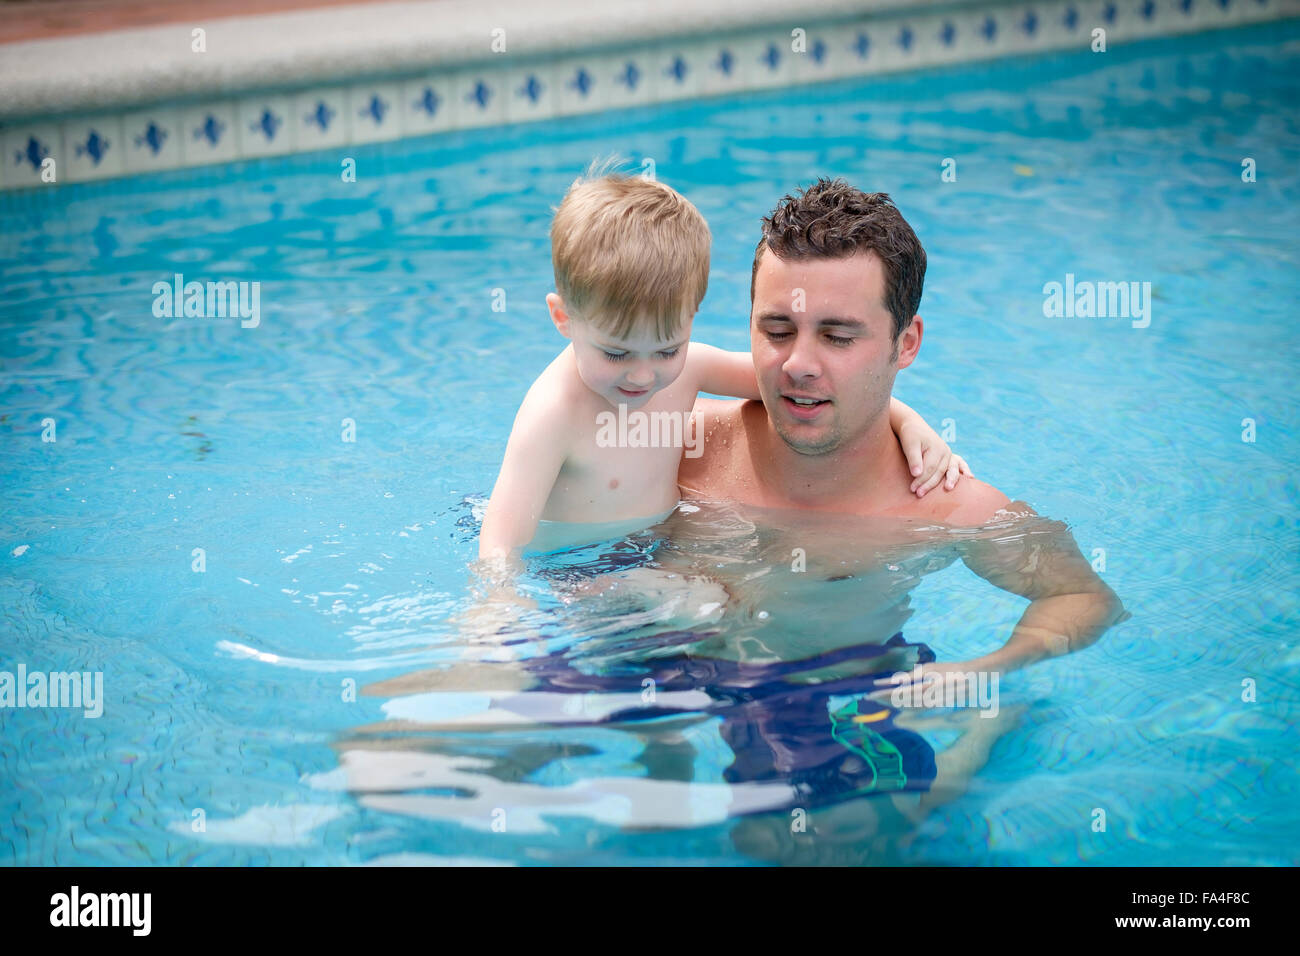 Young man carrying his toddler son in a swimming pool. Noth are enjoying the bath. Stock Photo